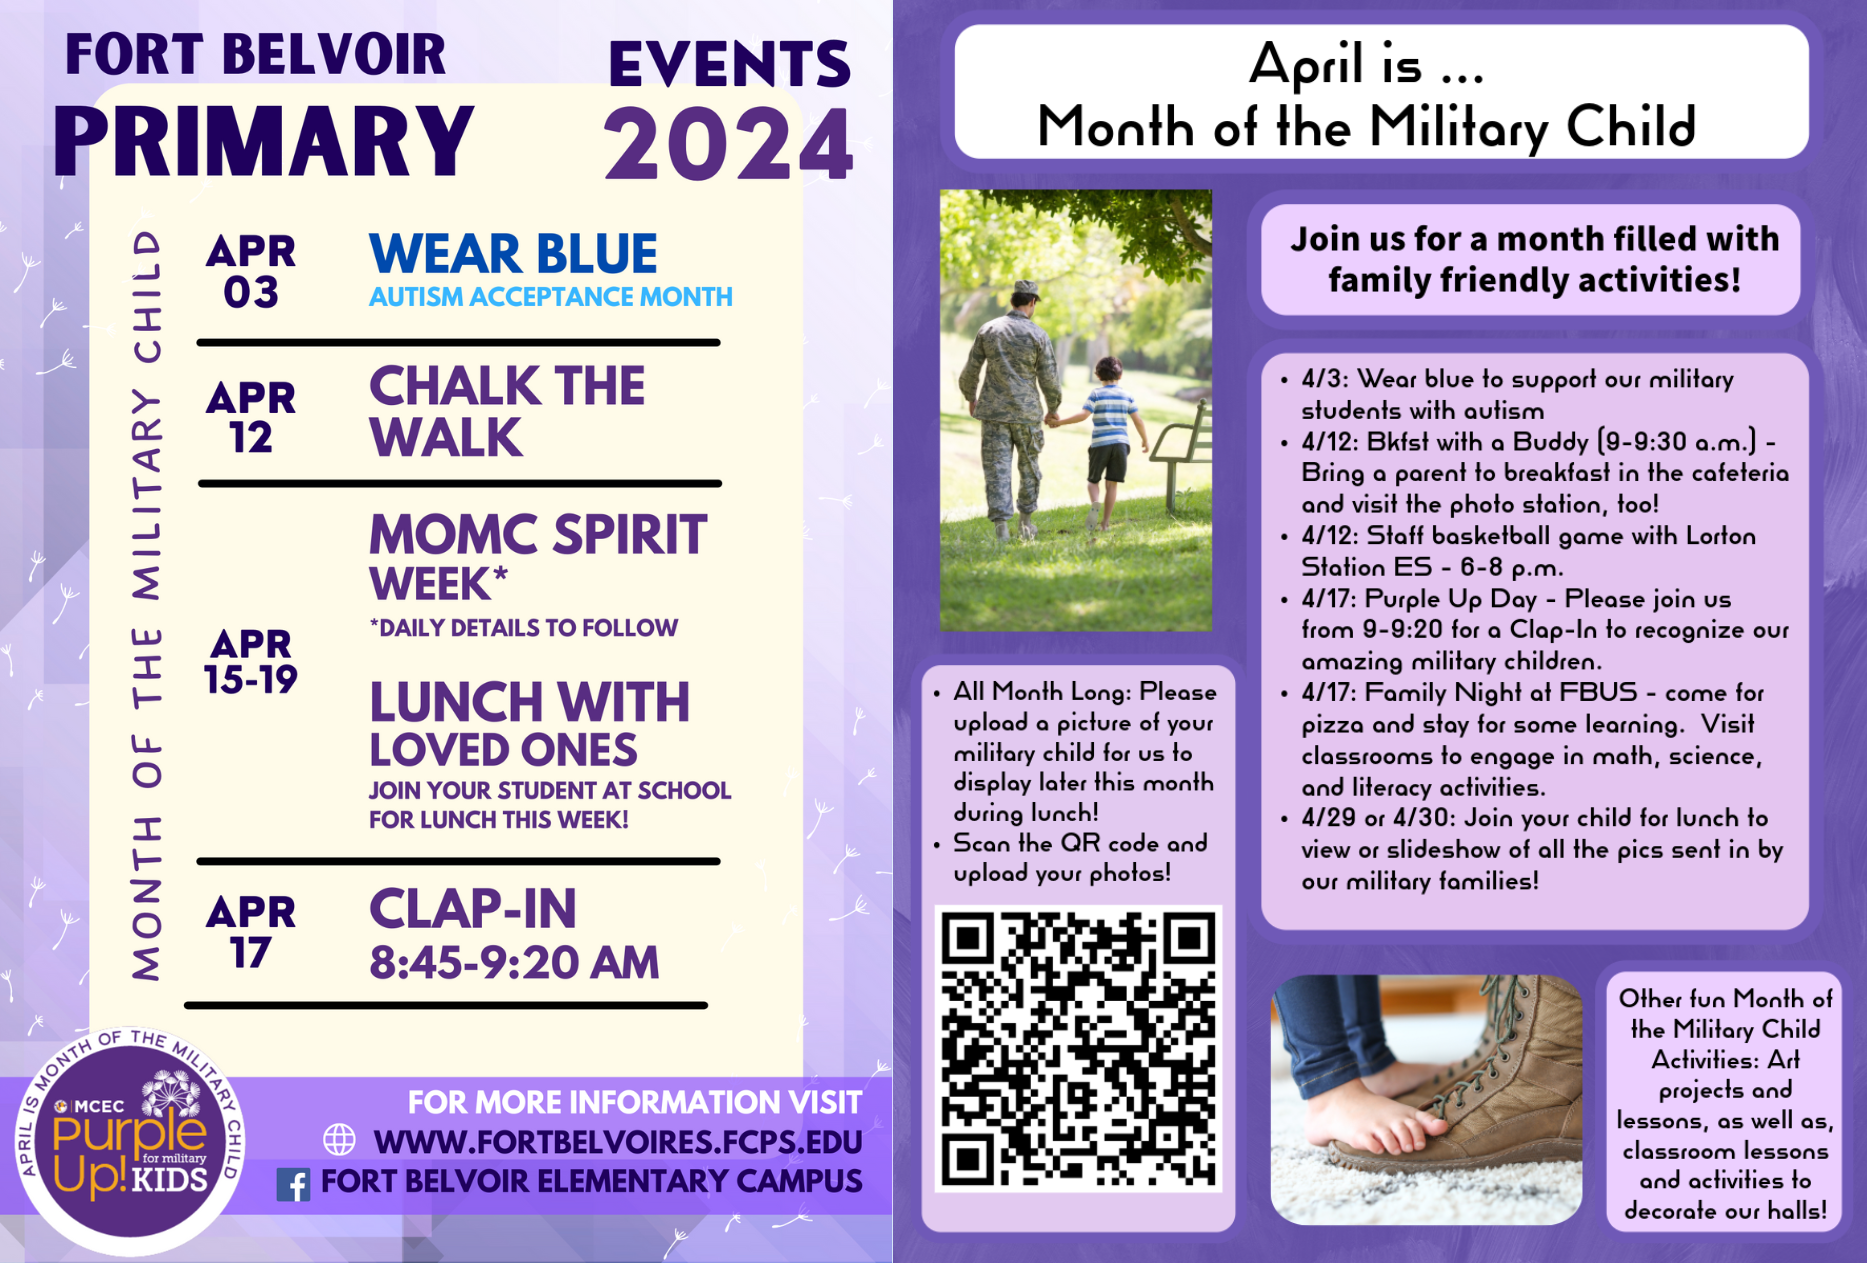 flyer with month of the military child events